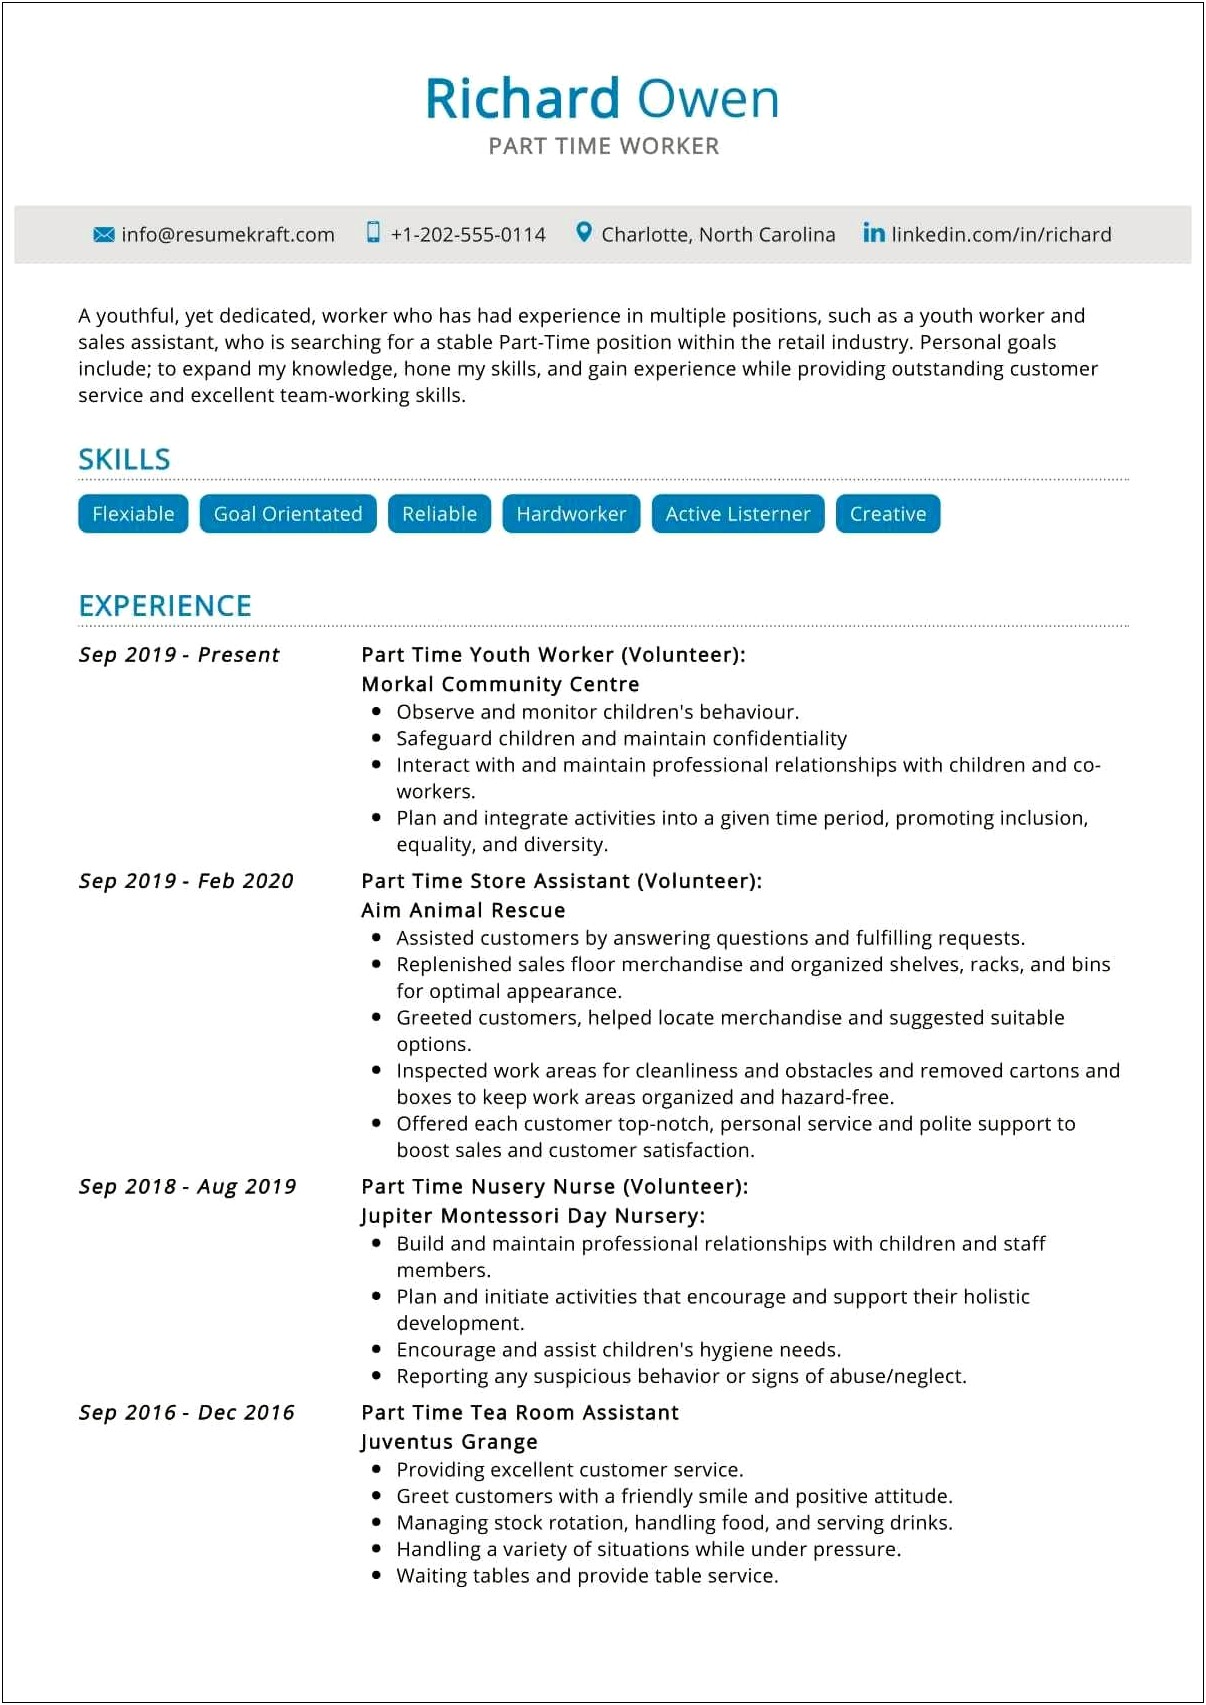 Sample Creative Personjal Assistant Resumes Or And Ads